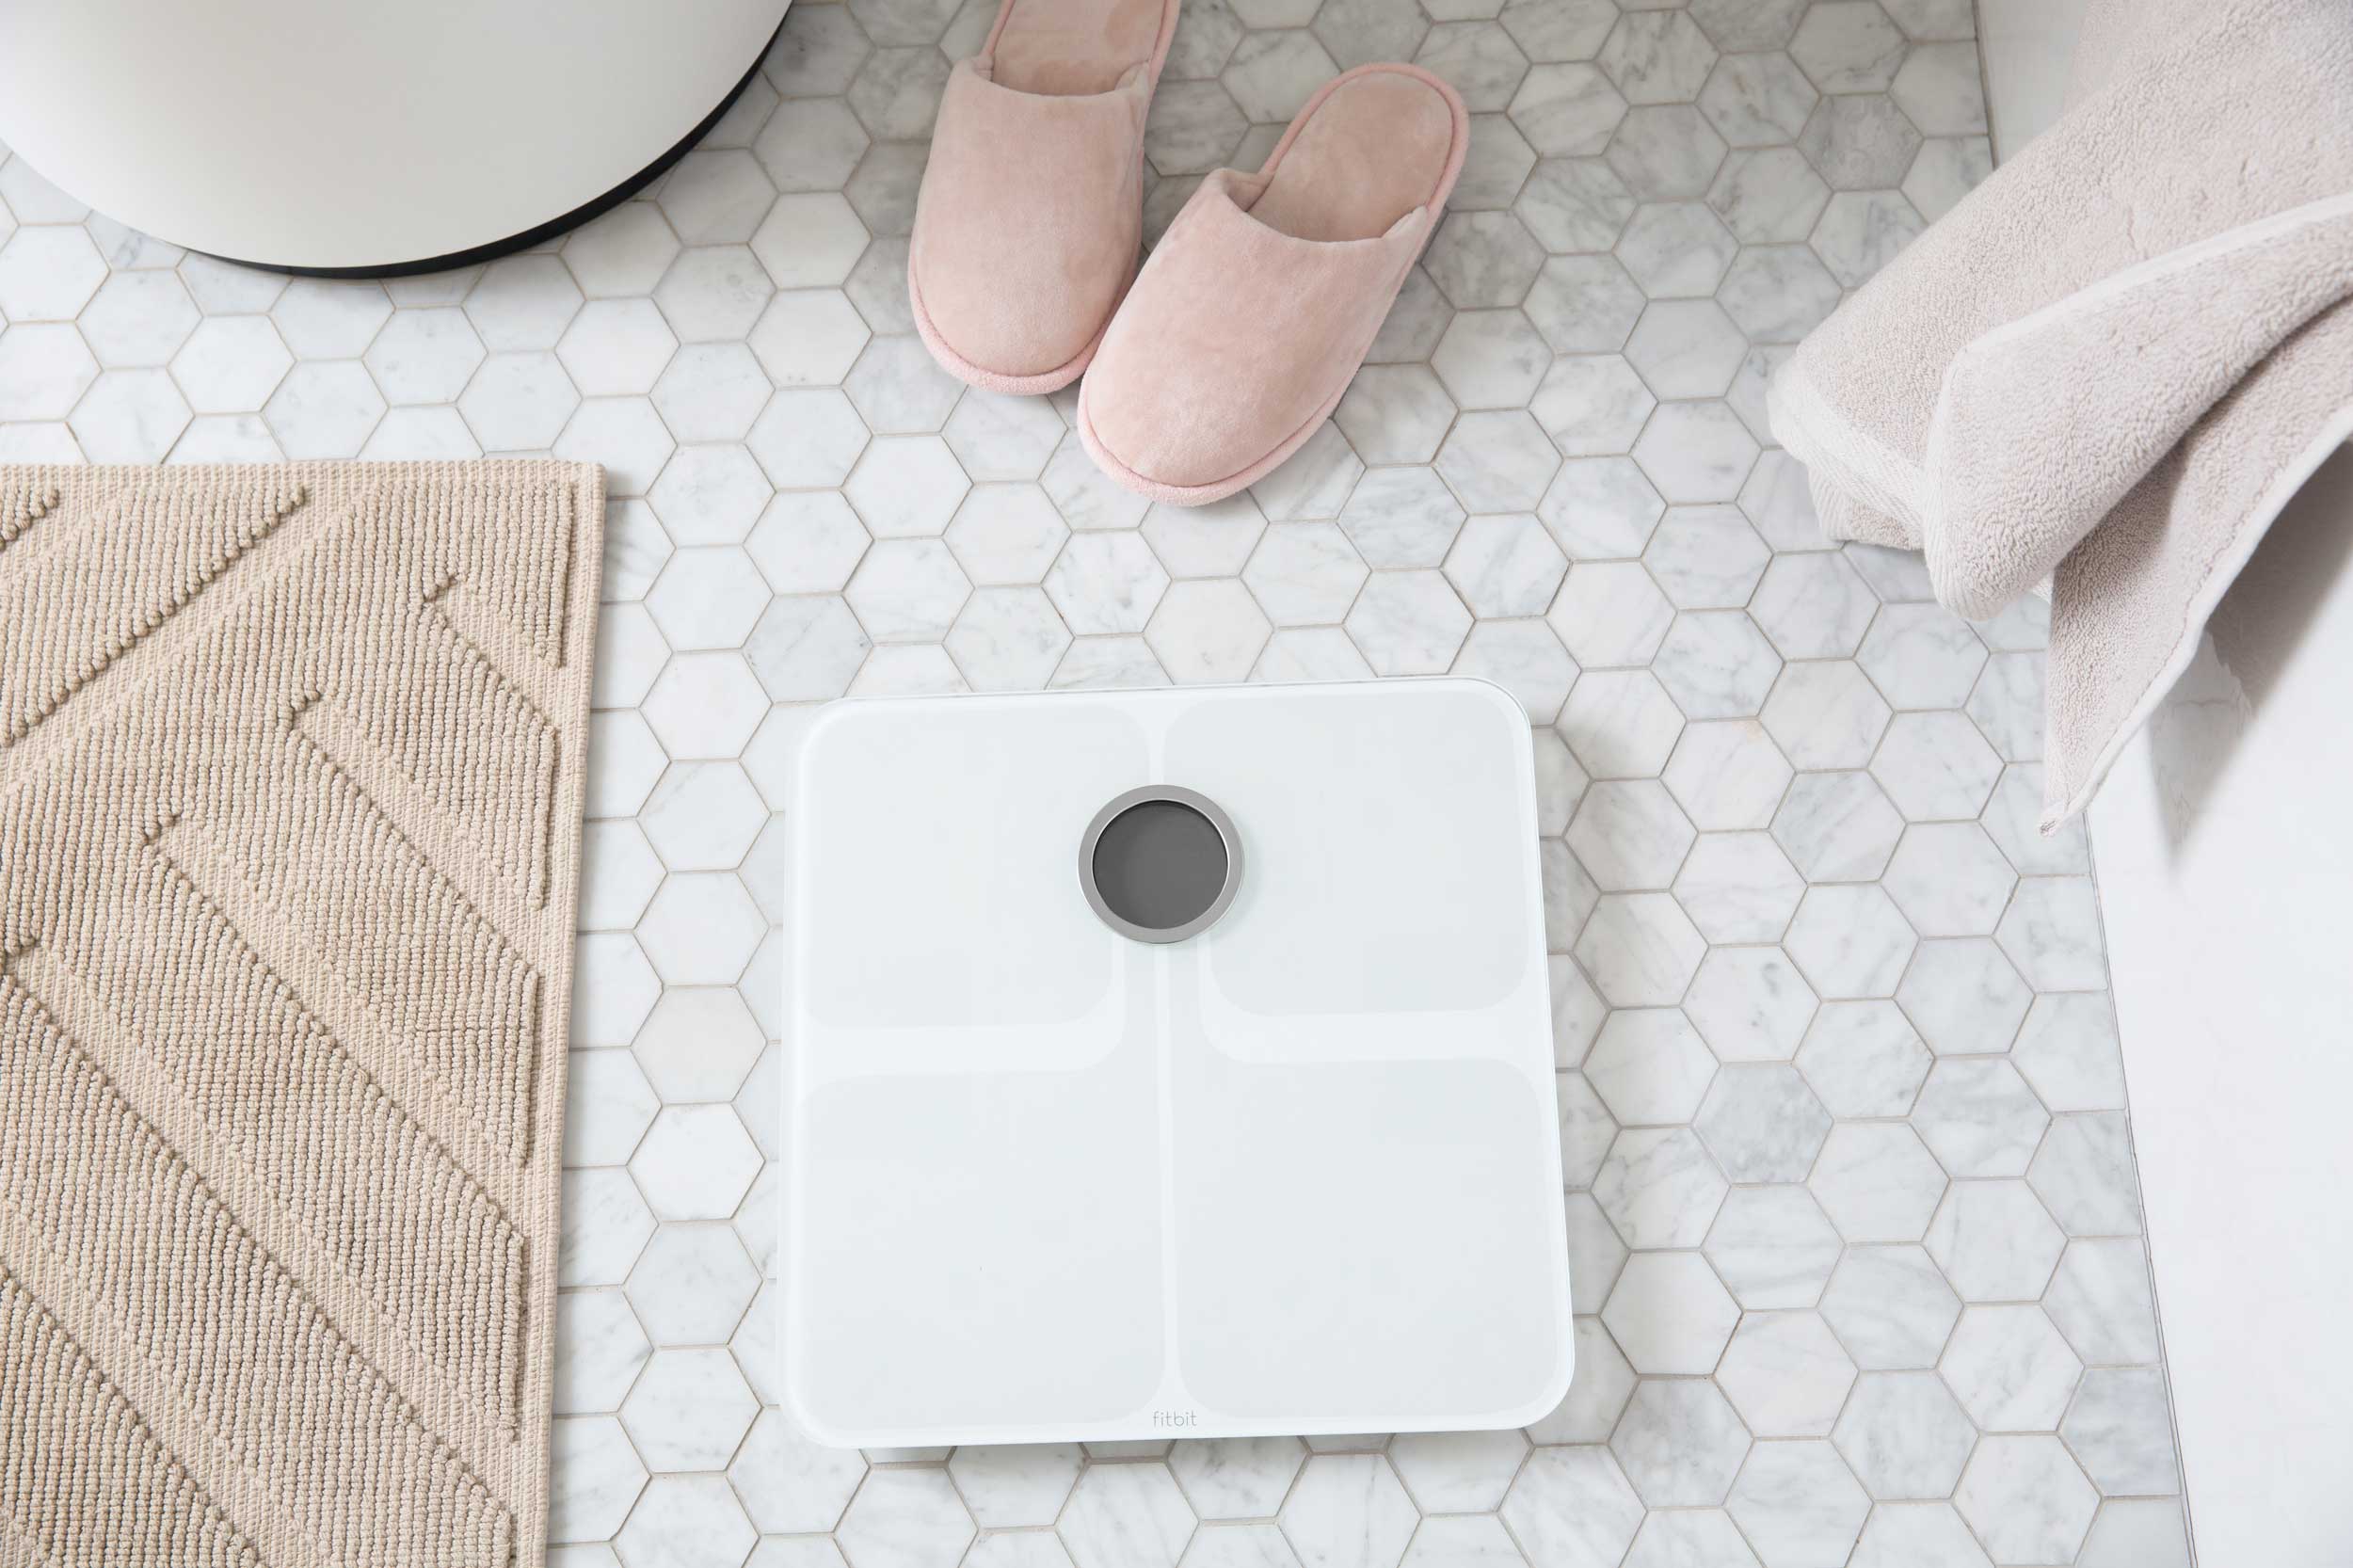 Fitbit Aria smart scale on kitchen tiles